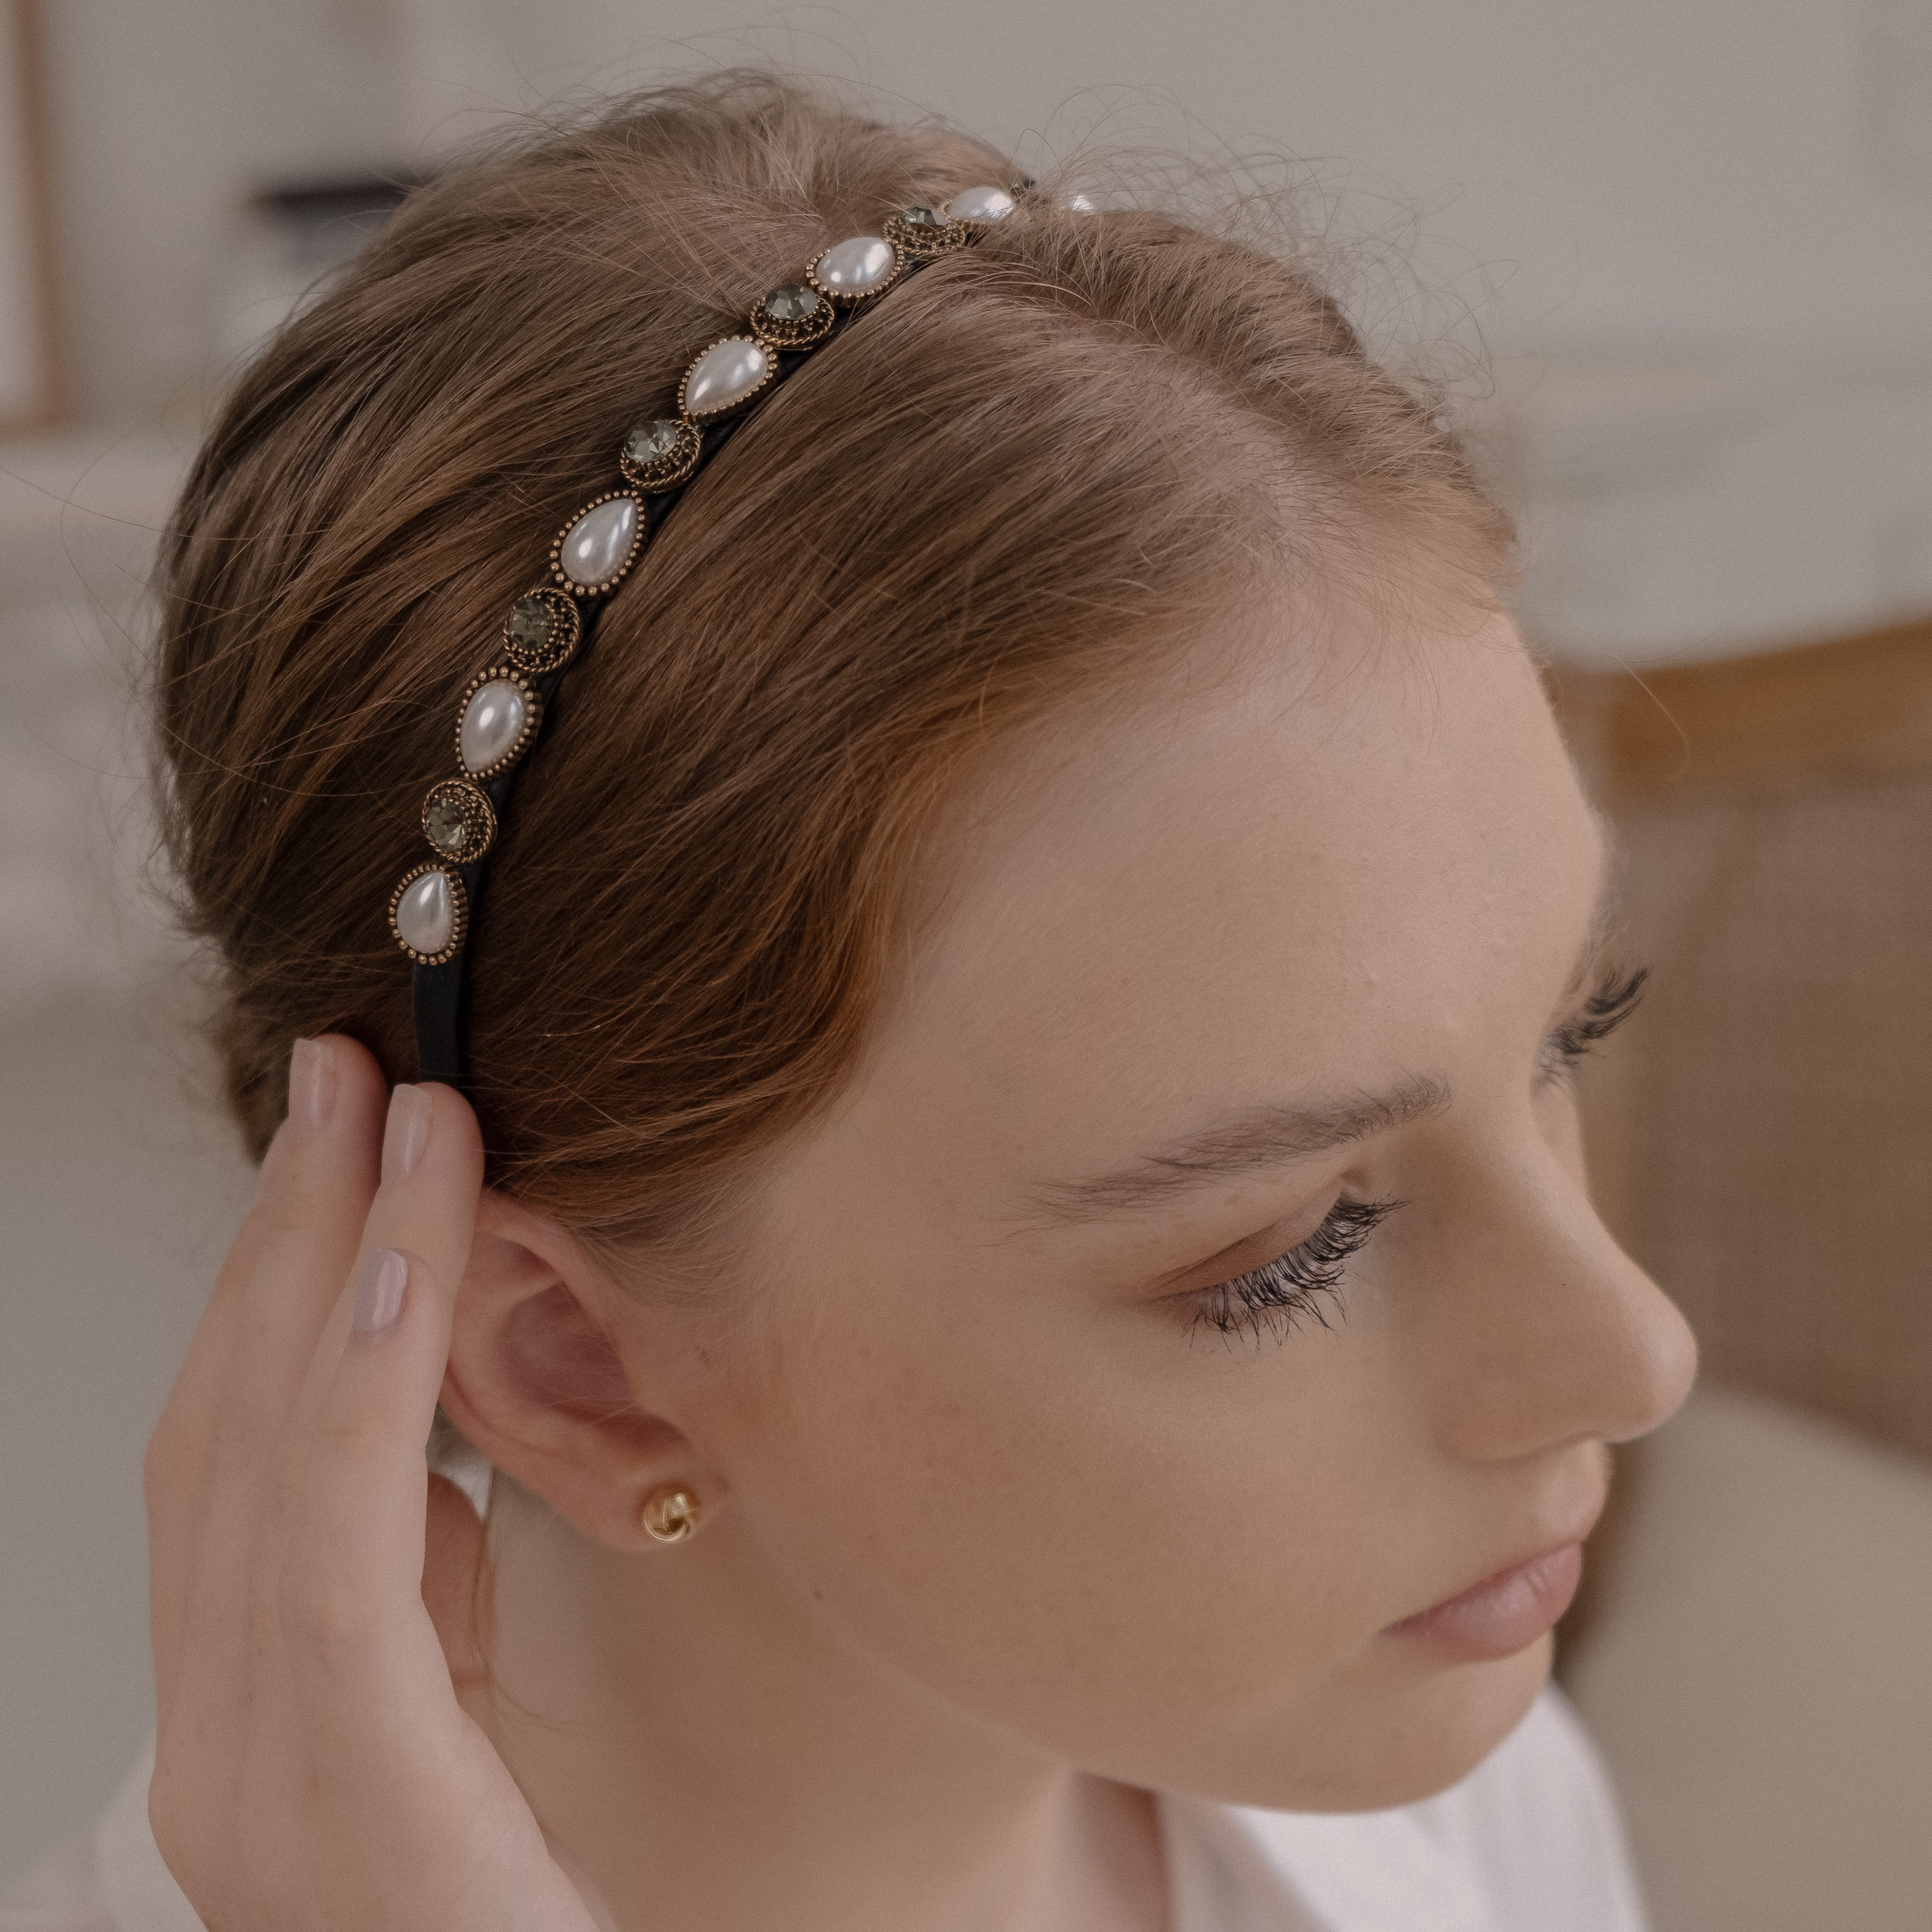 White and cream pearls and stones adorn a delicate gold headband, perfect for weddings and special occasions.